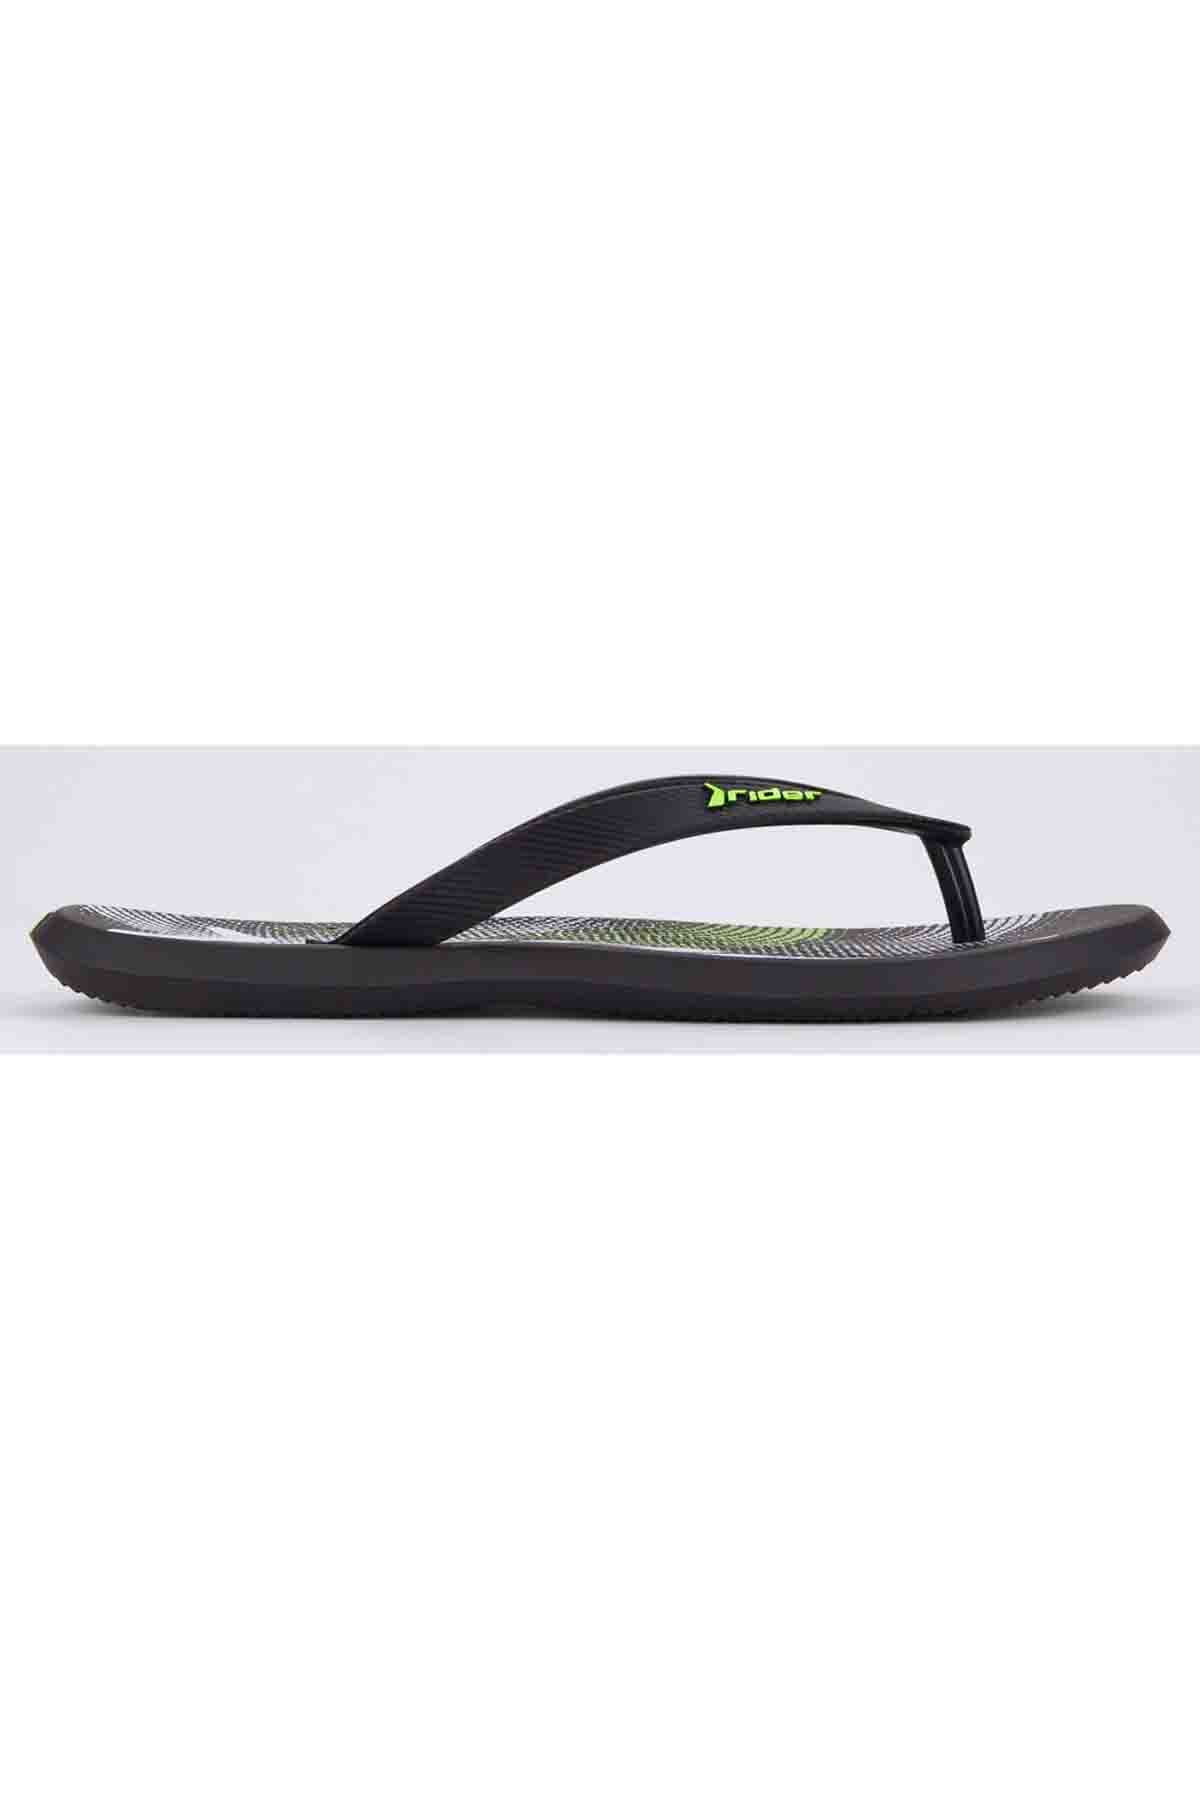 Slippers Rider R1 Graphics